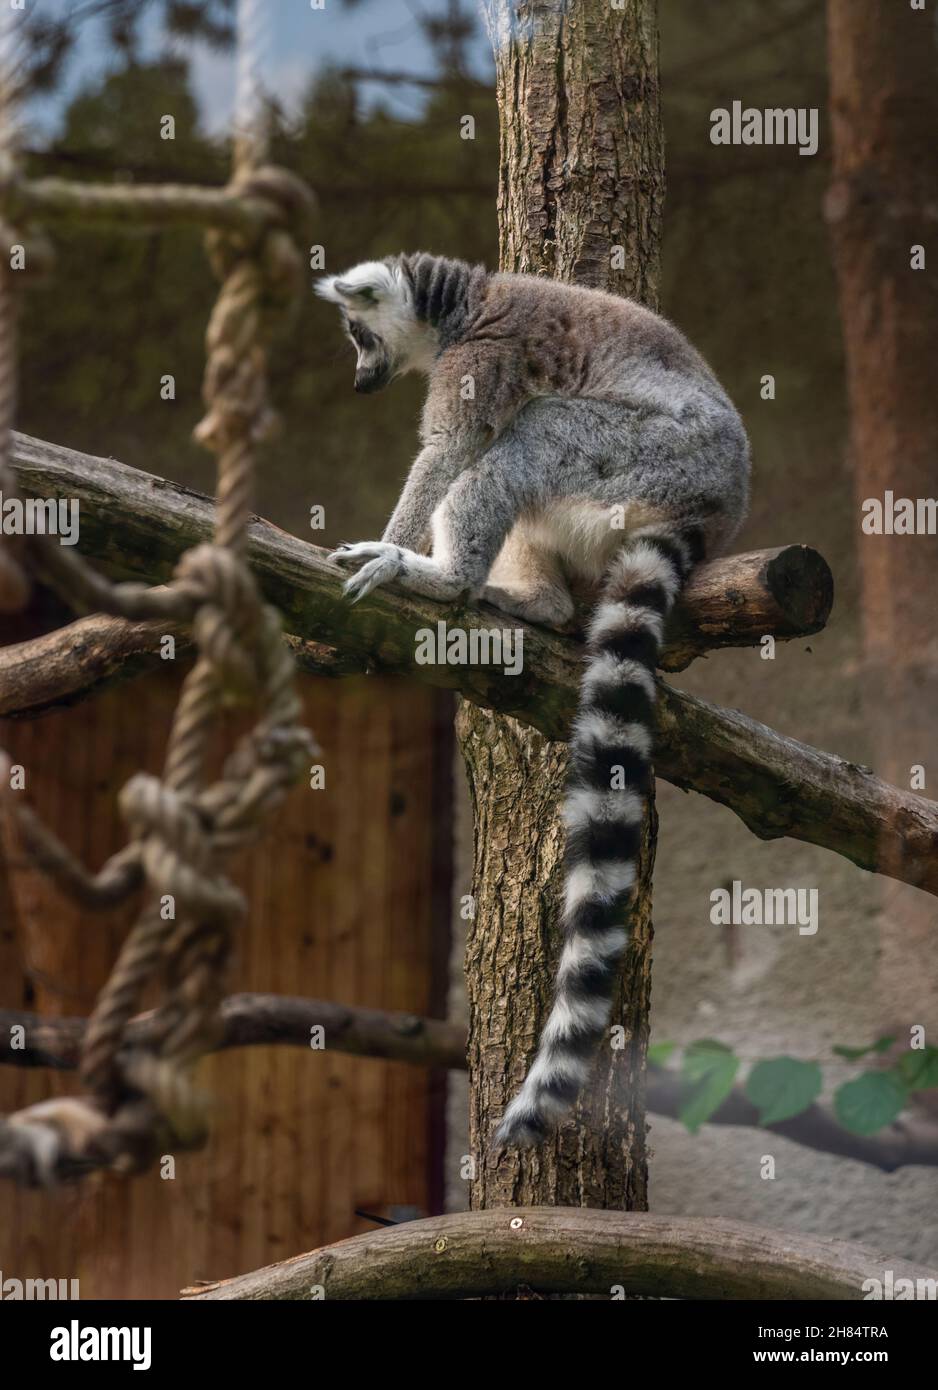 Lemur animal on wood with long striped black and white tail Stock Photo